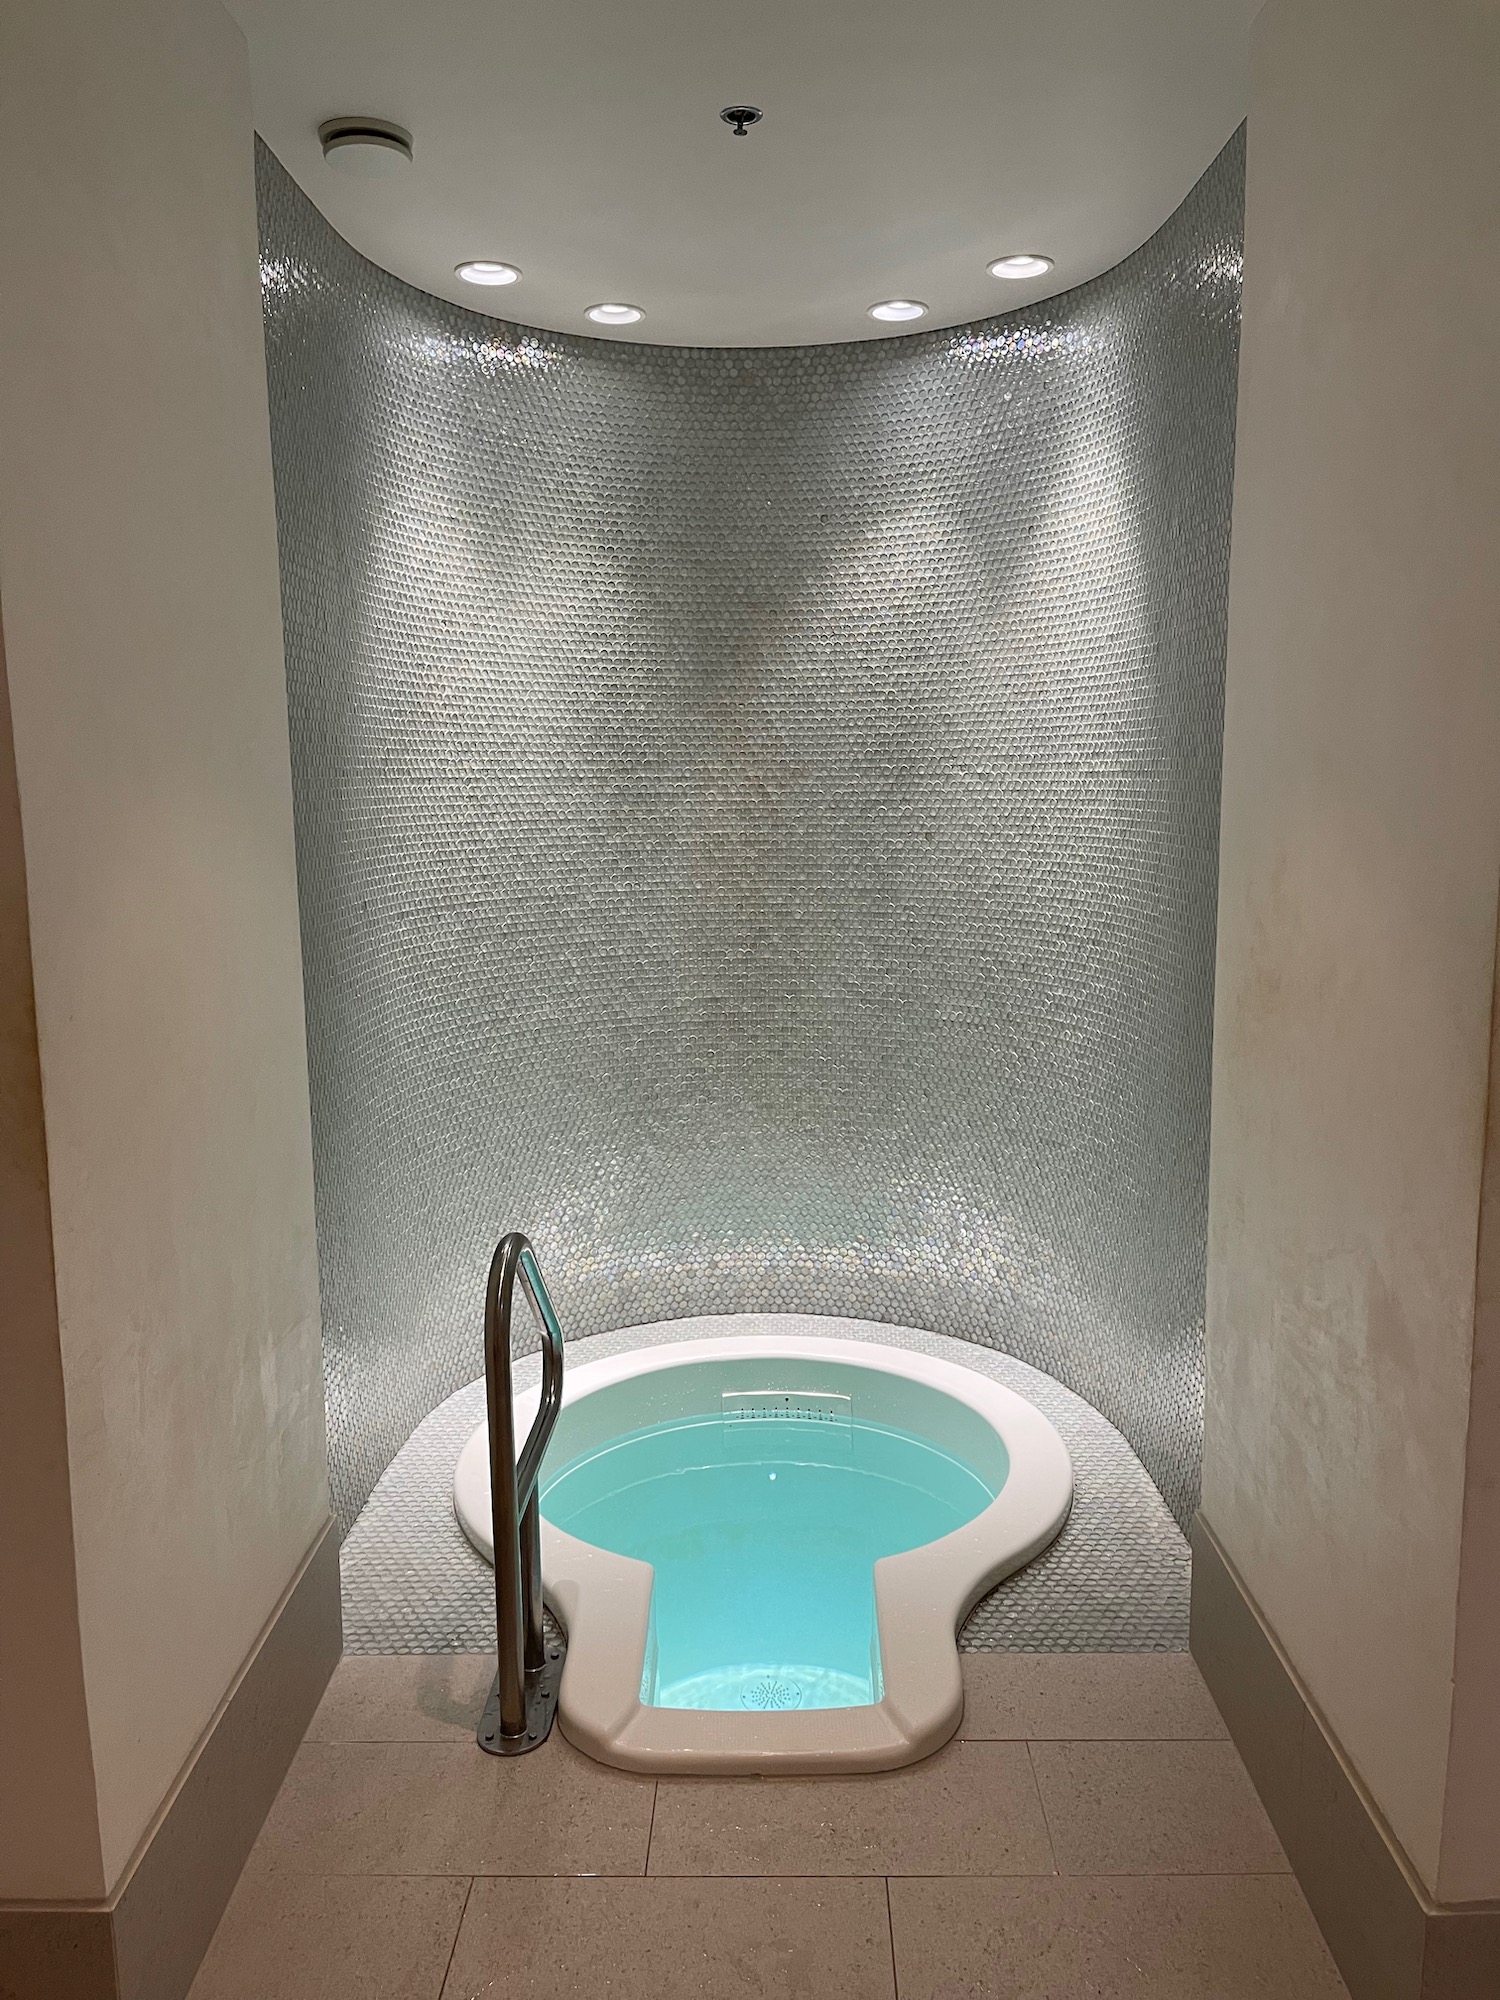 a small round bathtub with a silver tiled wall